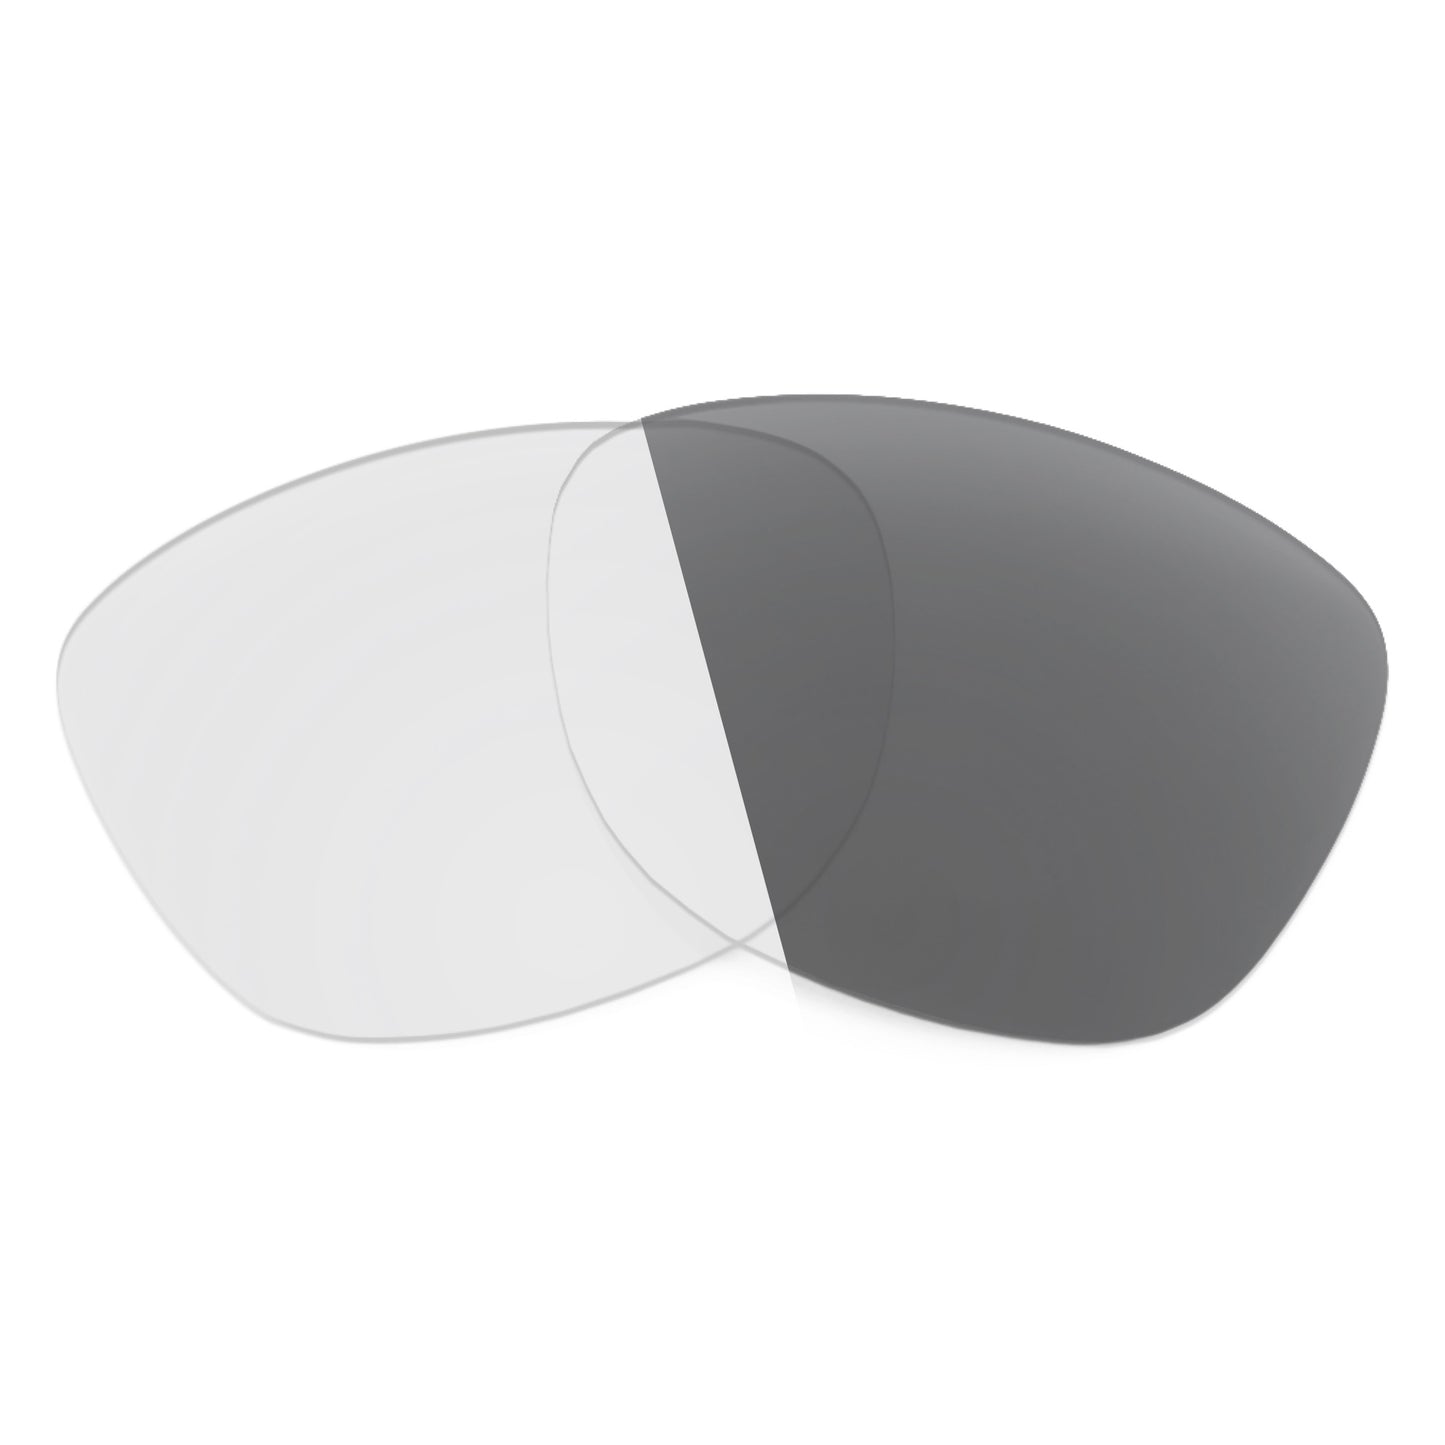 Revant replacement lenses for Ray-Ban RB4216 56mm Non-Polarized Adapt Gray Photochromic